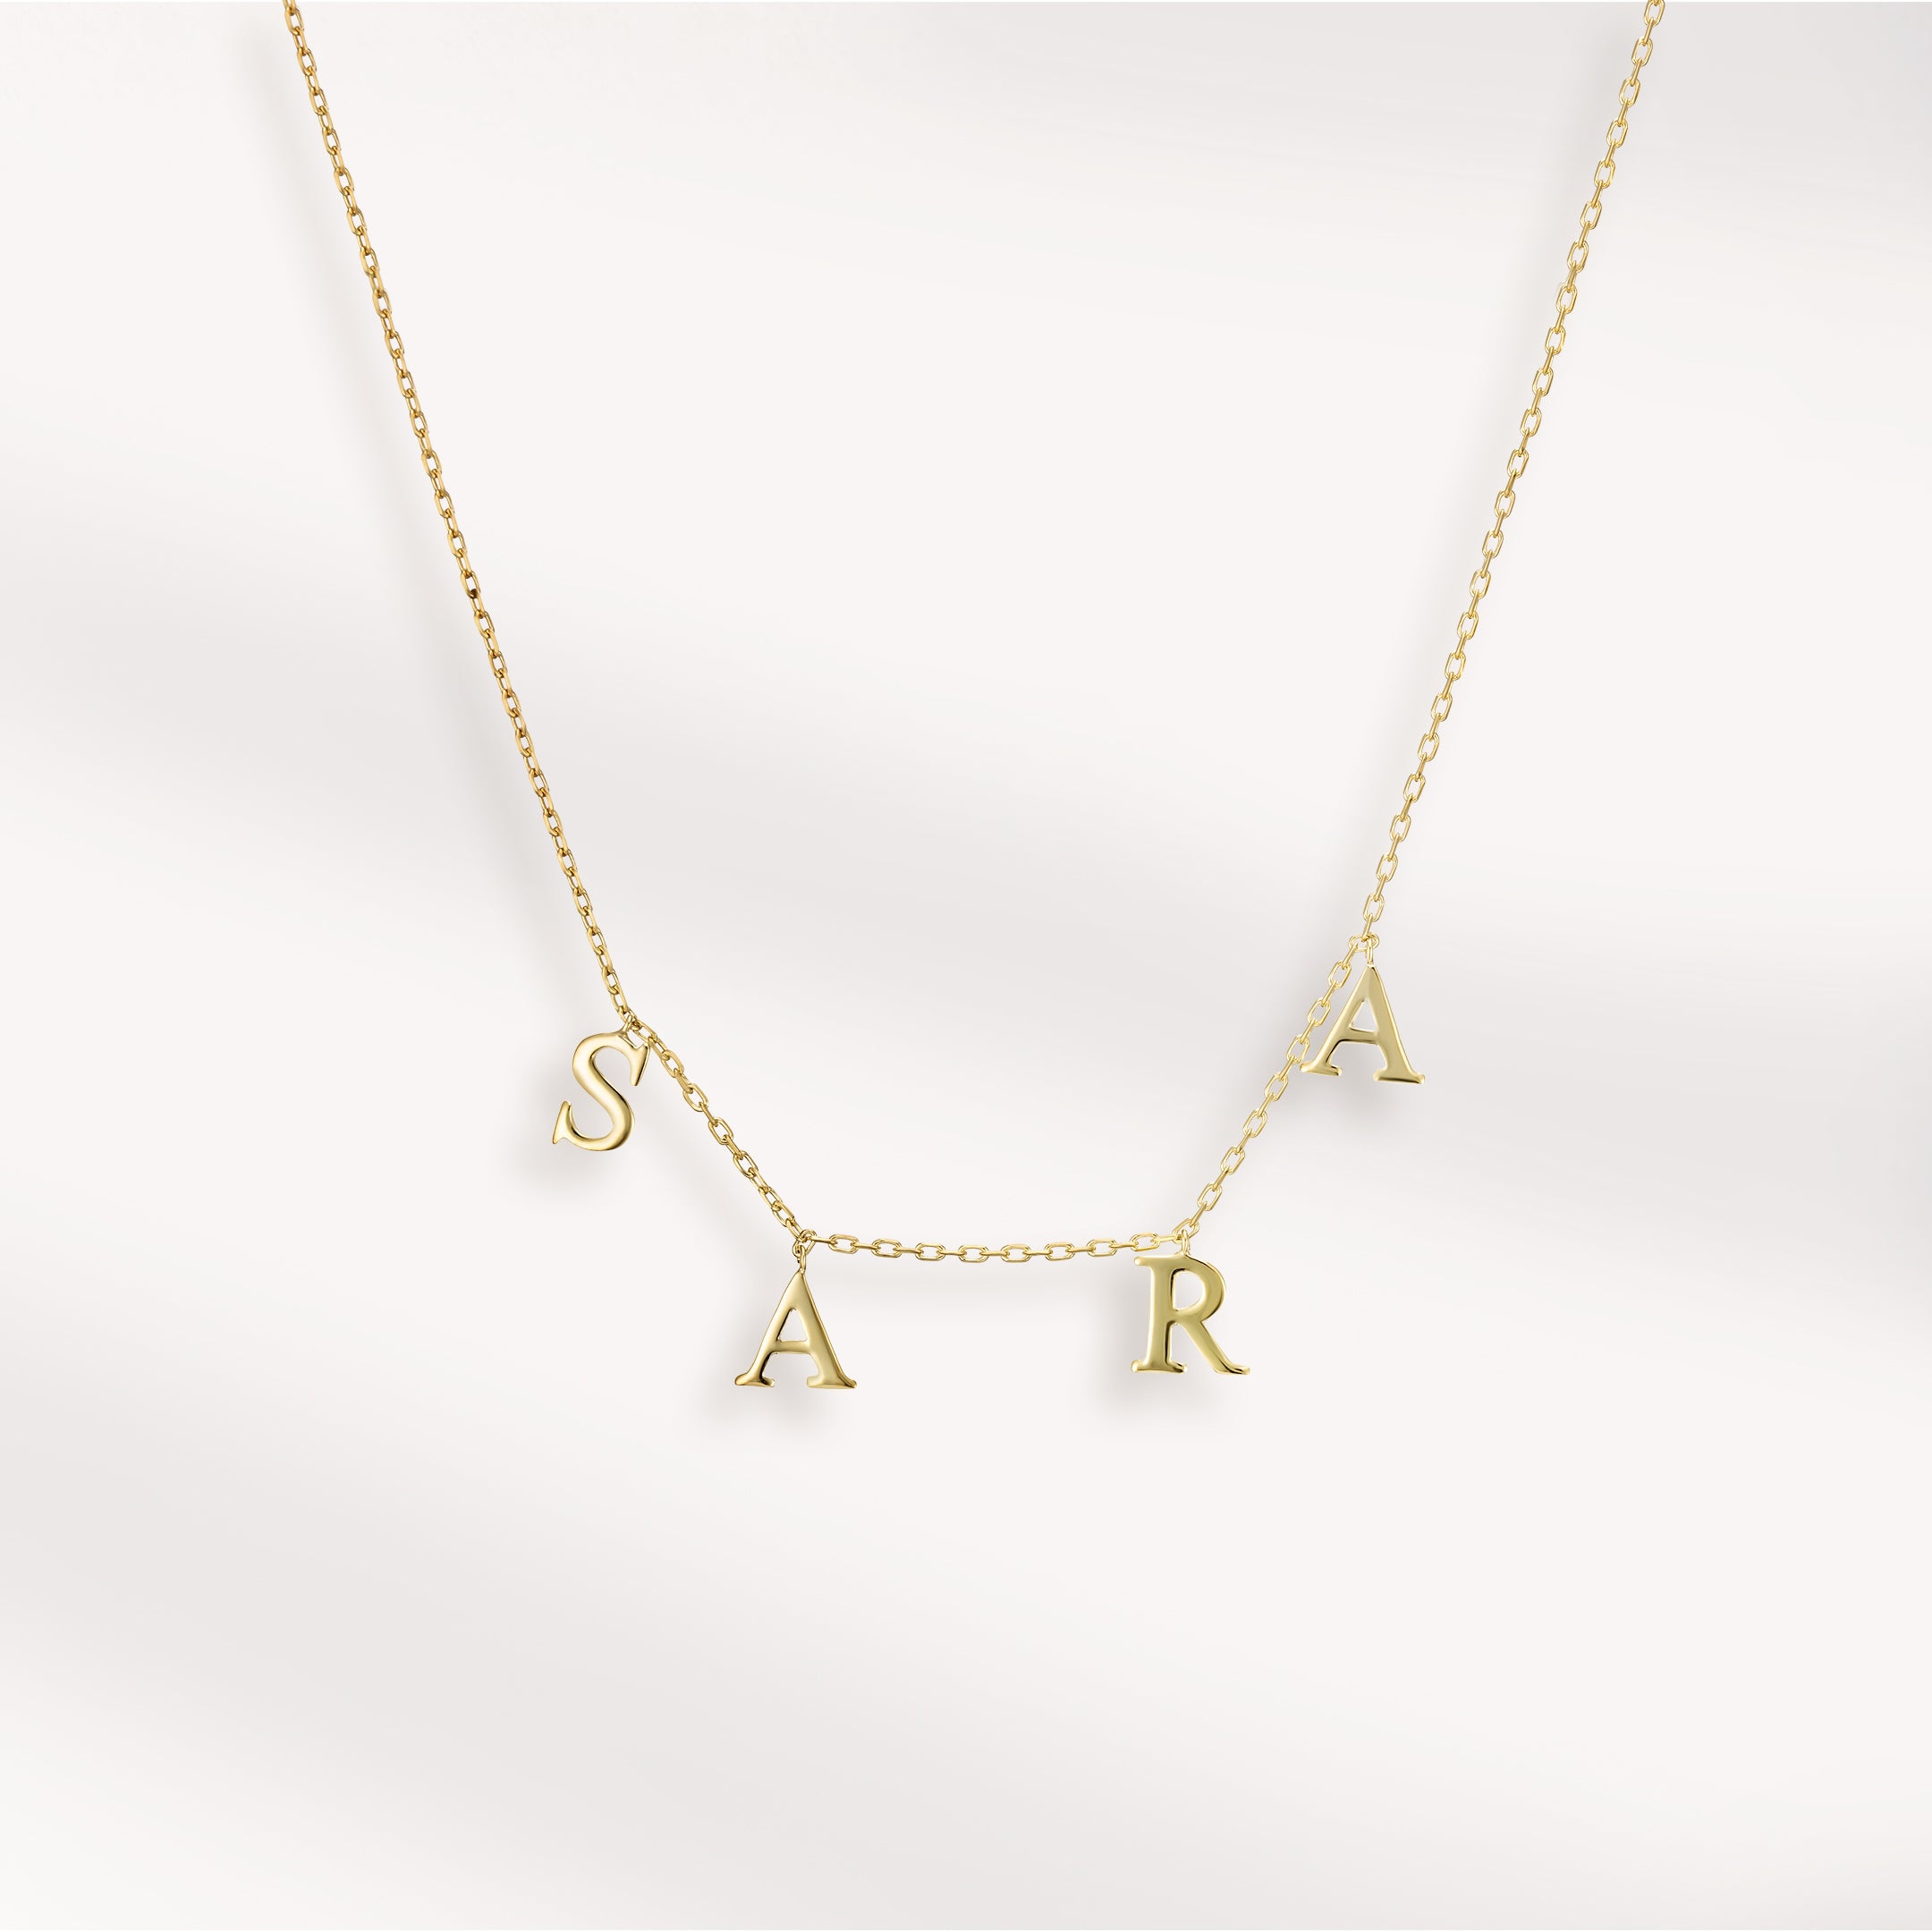 Jewellery, Chain Necklace, 18k Gold Plated Necklace, 18k Pure Gold, Necklace, Silver 925 Necklace, Short Necklace, Handmade, Customisable Necklace, Letters Necklace, Arabic Alphabet Necklace, Latin Alphabet Necklace, Separated Letters Necklace